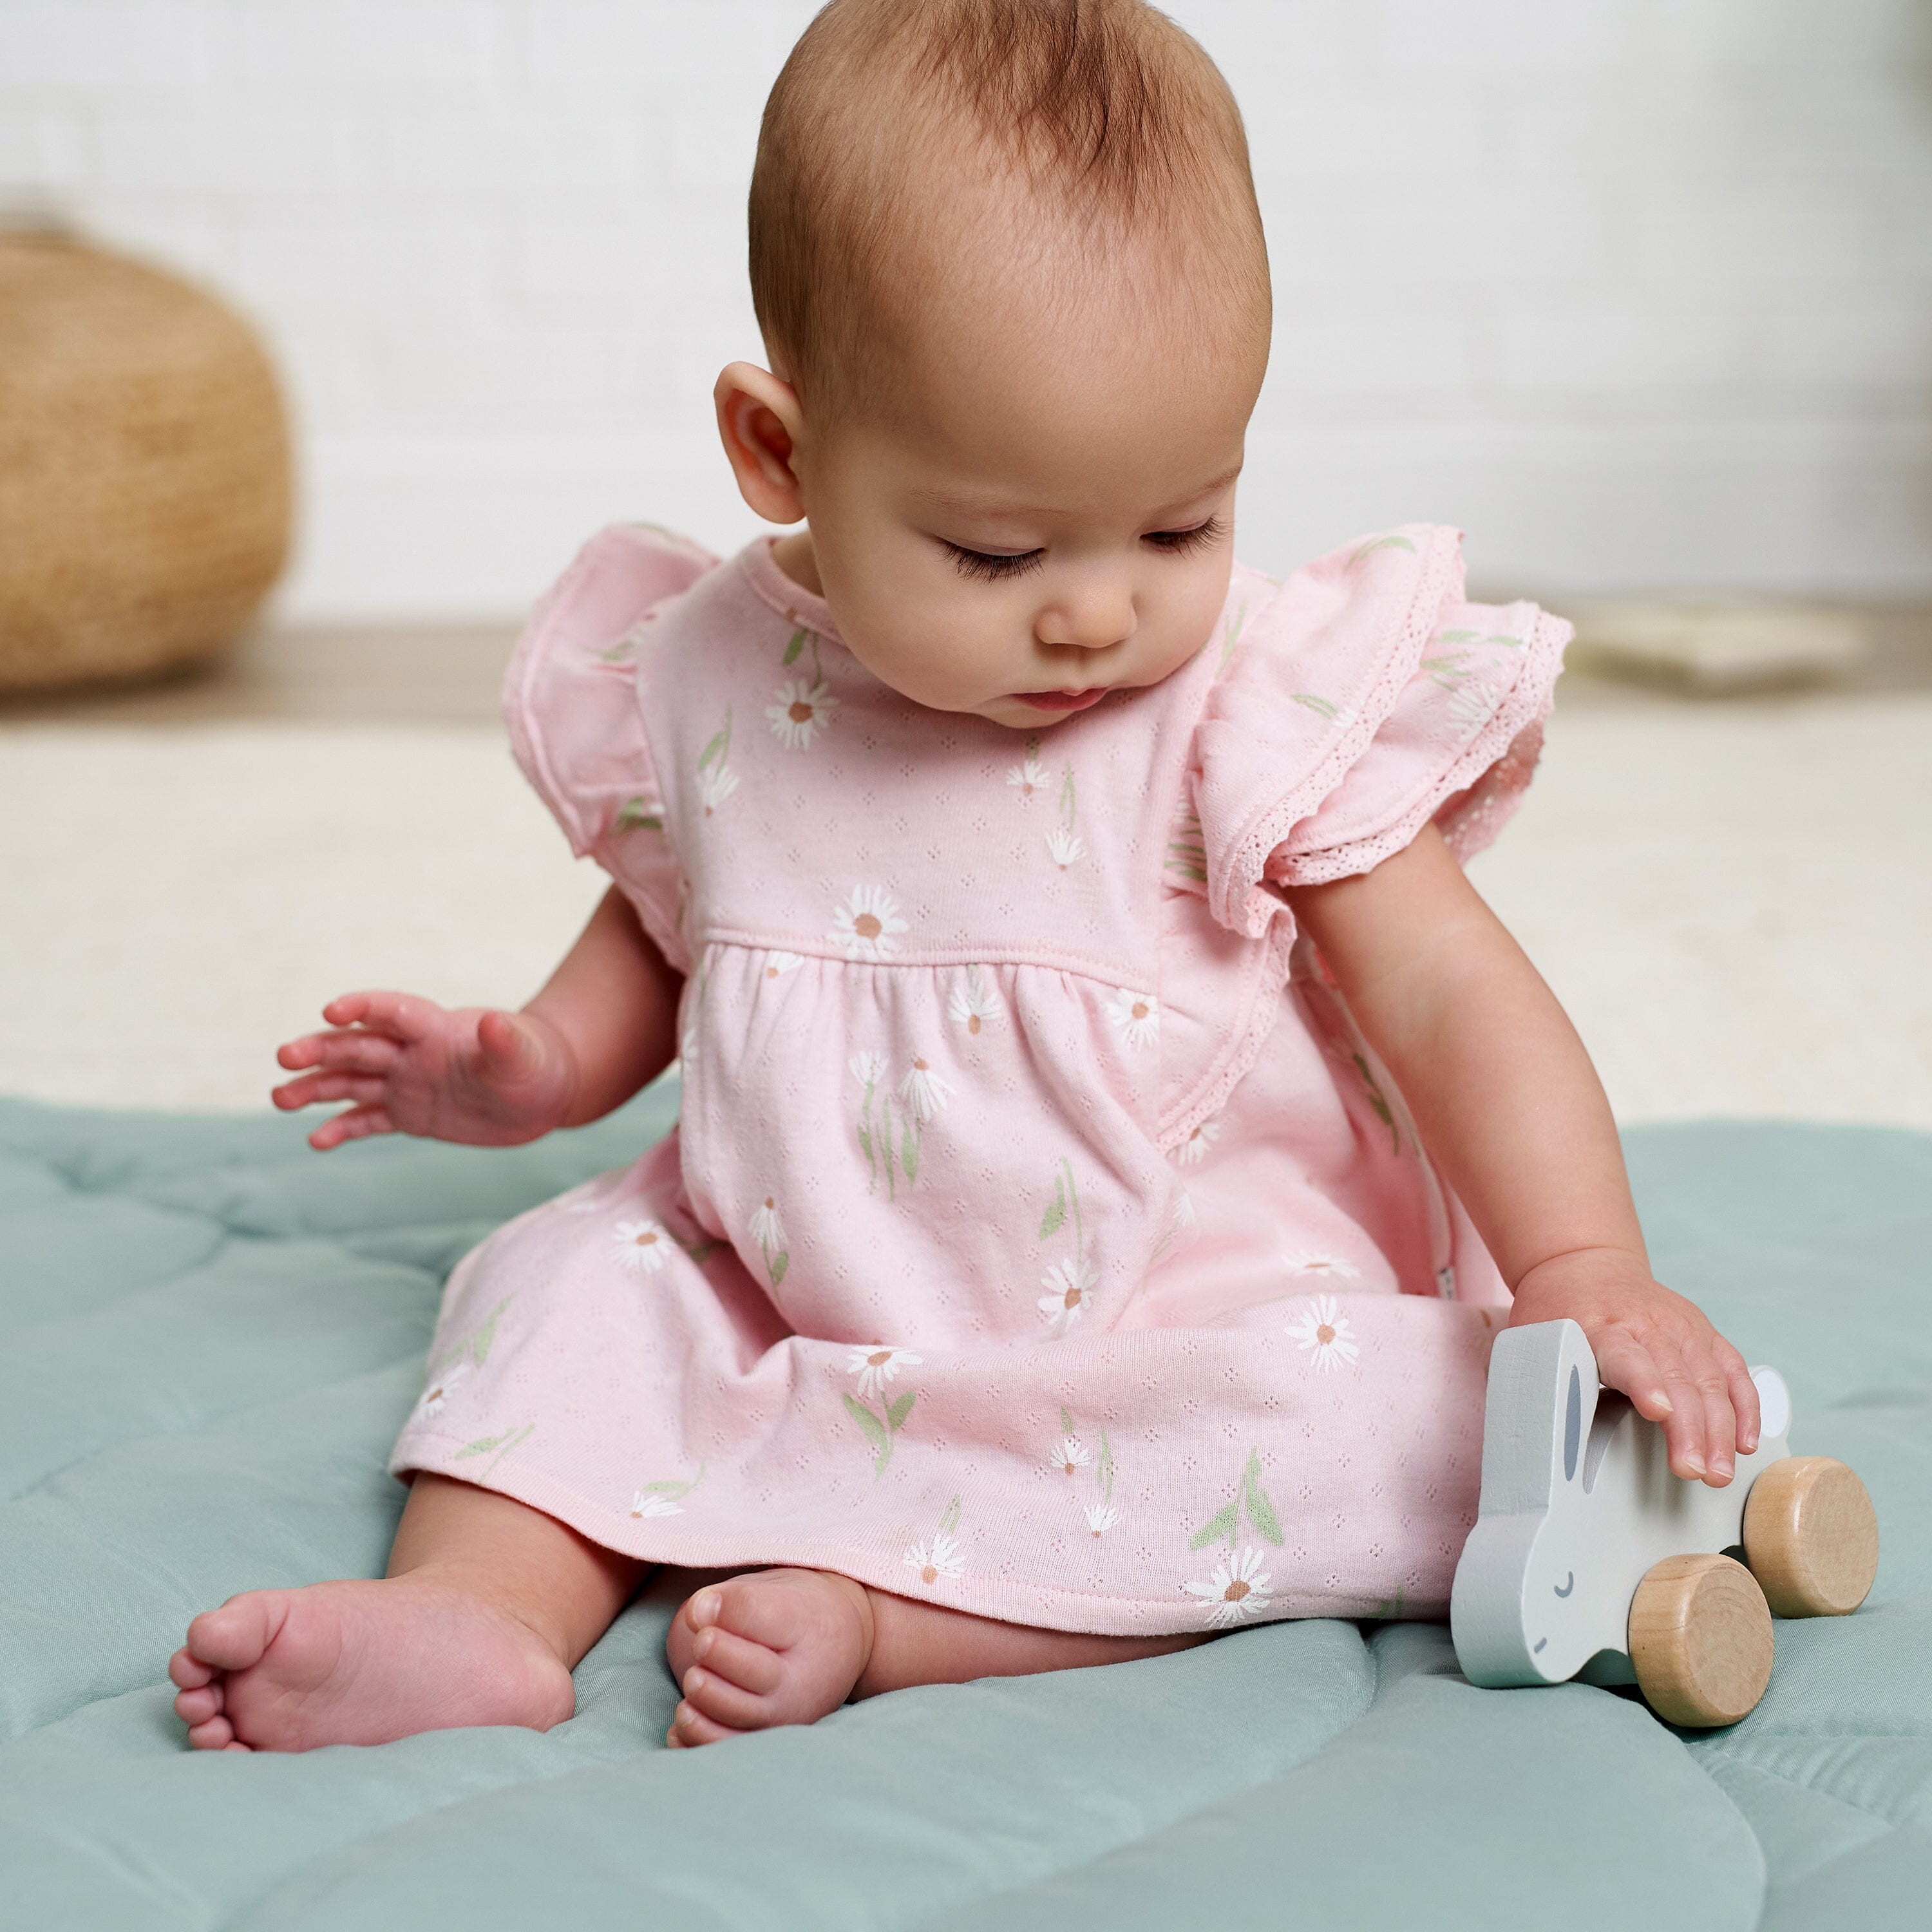 Newborn Children Clothing Girl Baby Woven Pink Dress Wear with Lace - China  No Sleeve and Cotton Fabric price | Made-in-China.com